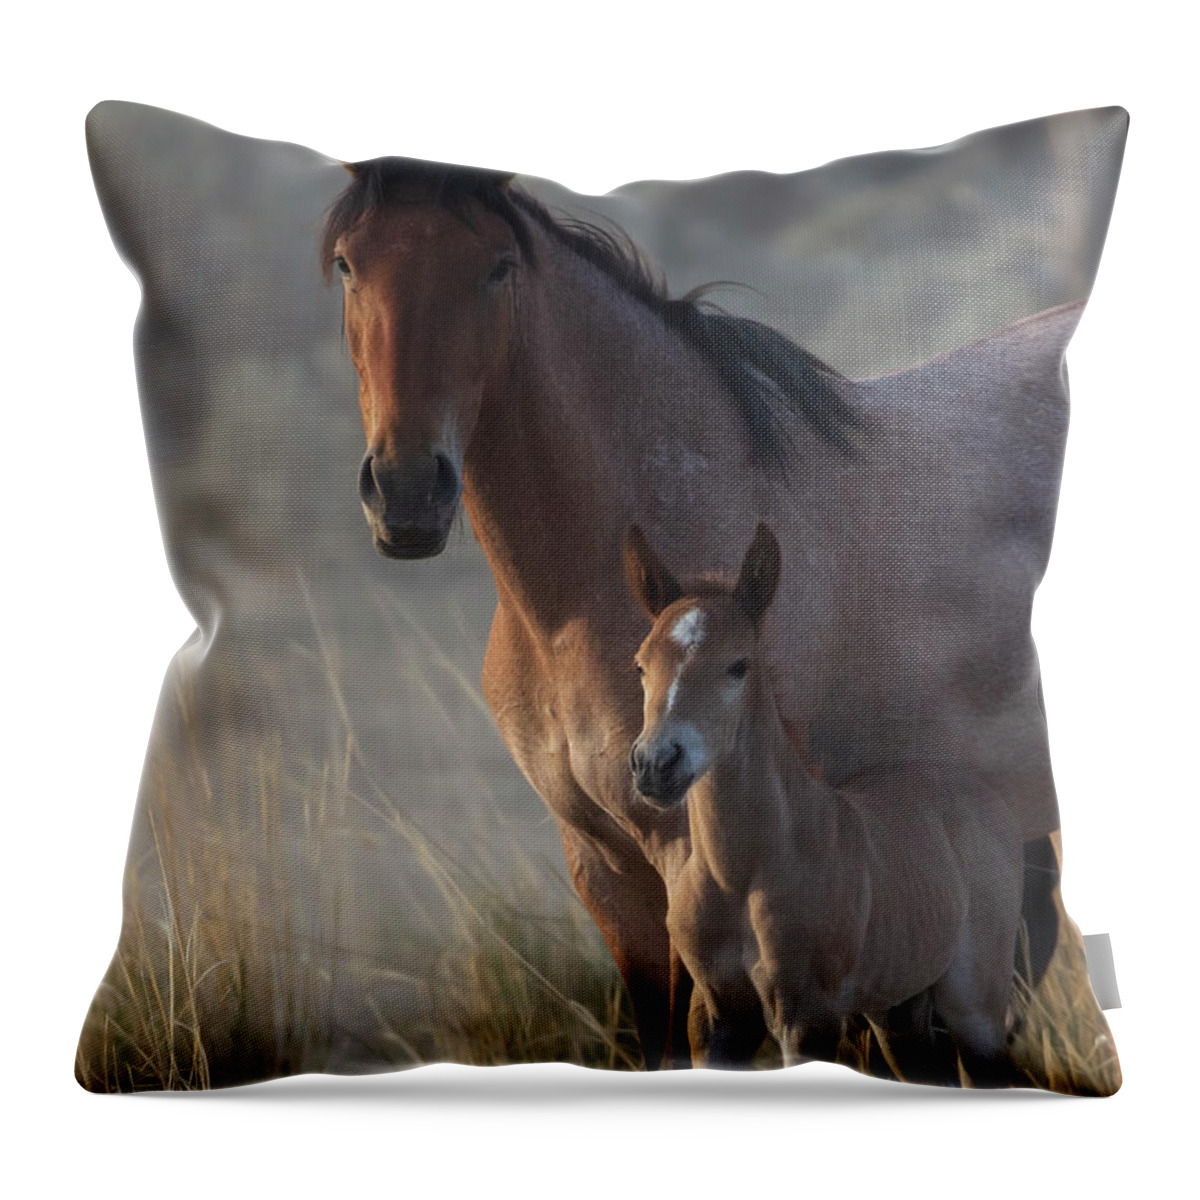  Throw Pillow featuring the photograph _t__9496 by John T Humphrey